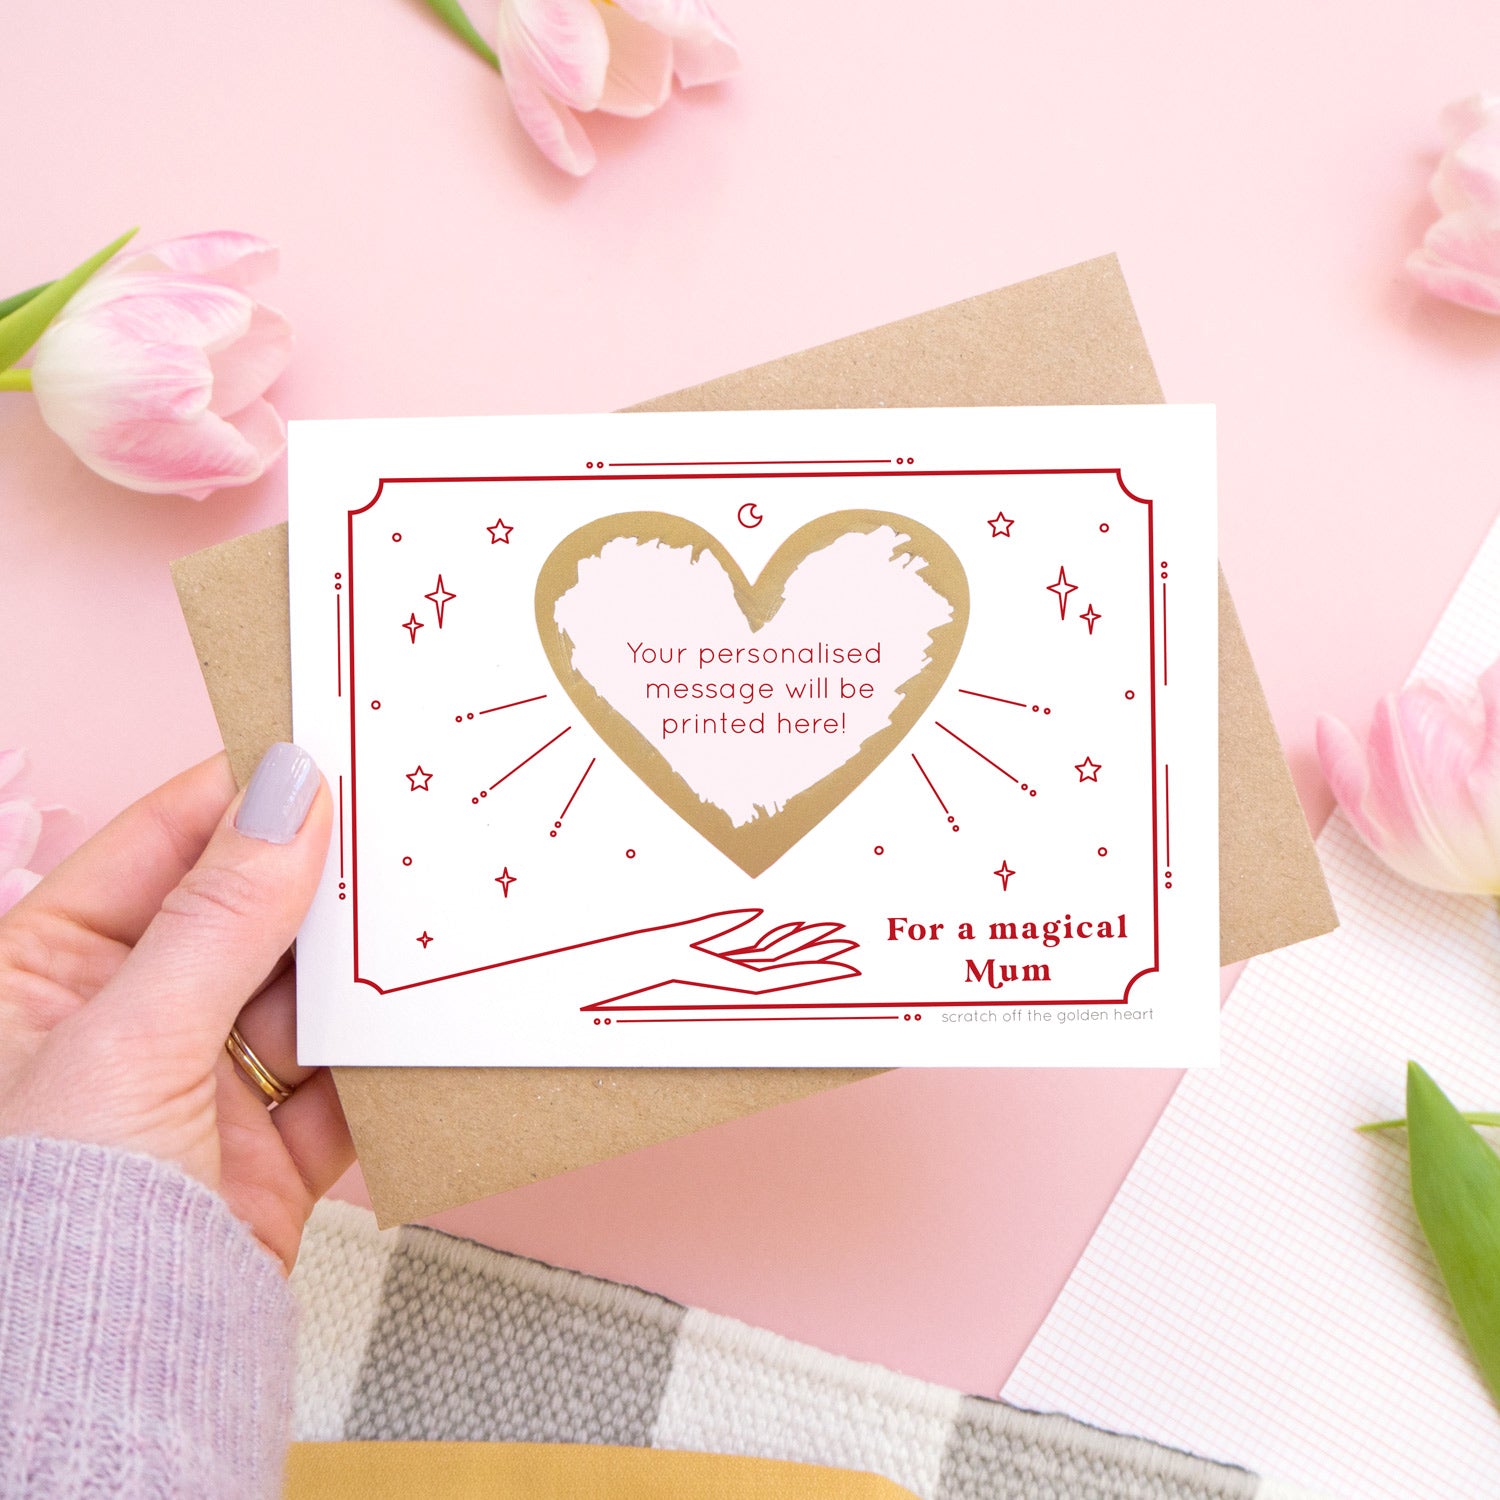 A personalised 'magical mum' scratch card showing where your personalised message is printed with the gold heart scratched off. The card is being held over a pink background with pink tulips.